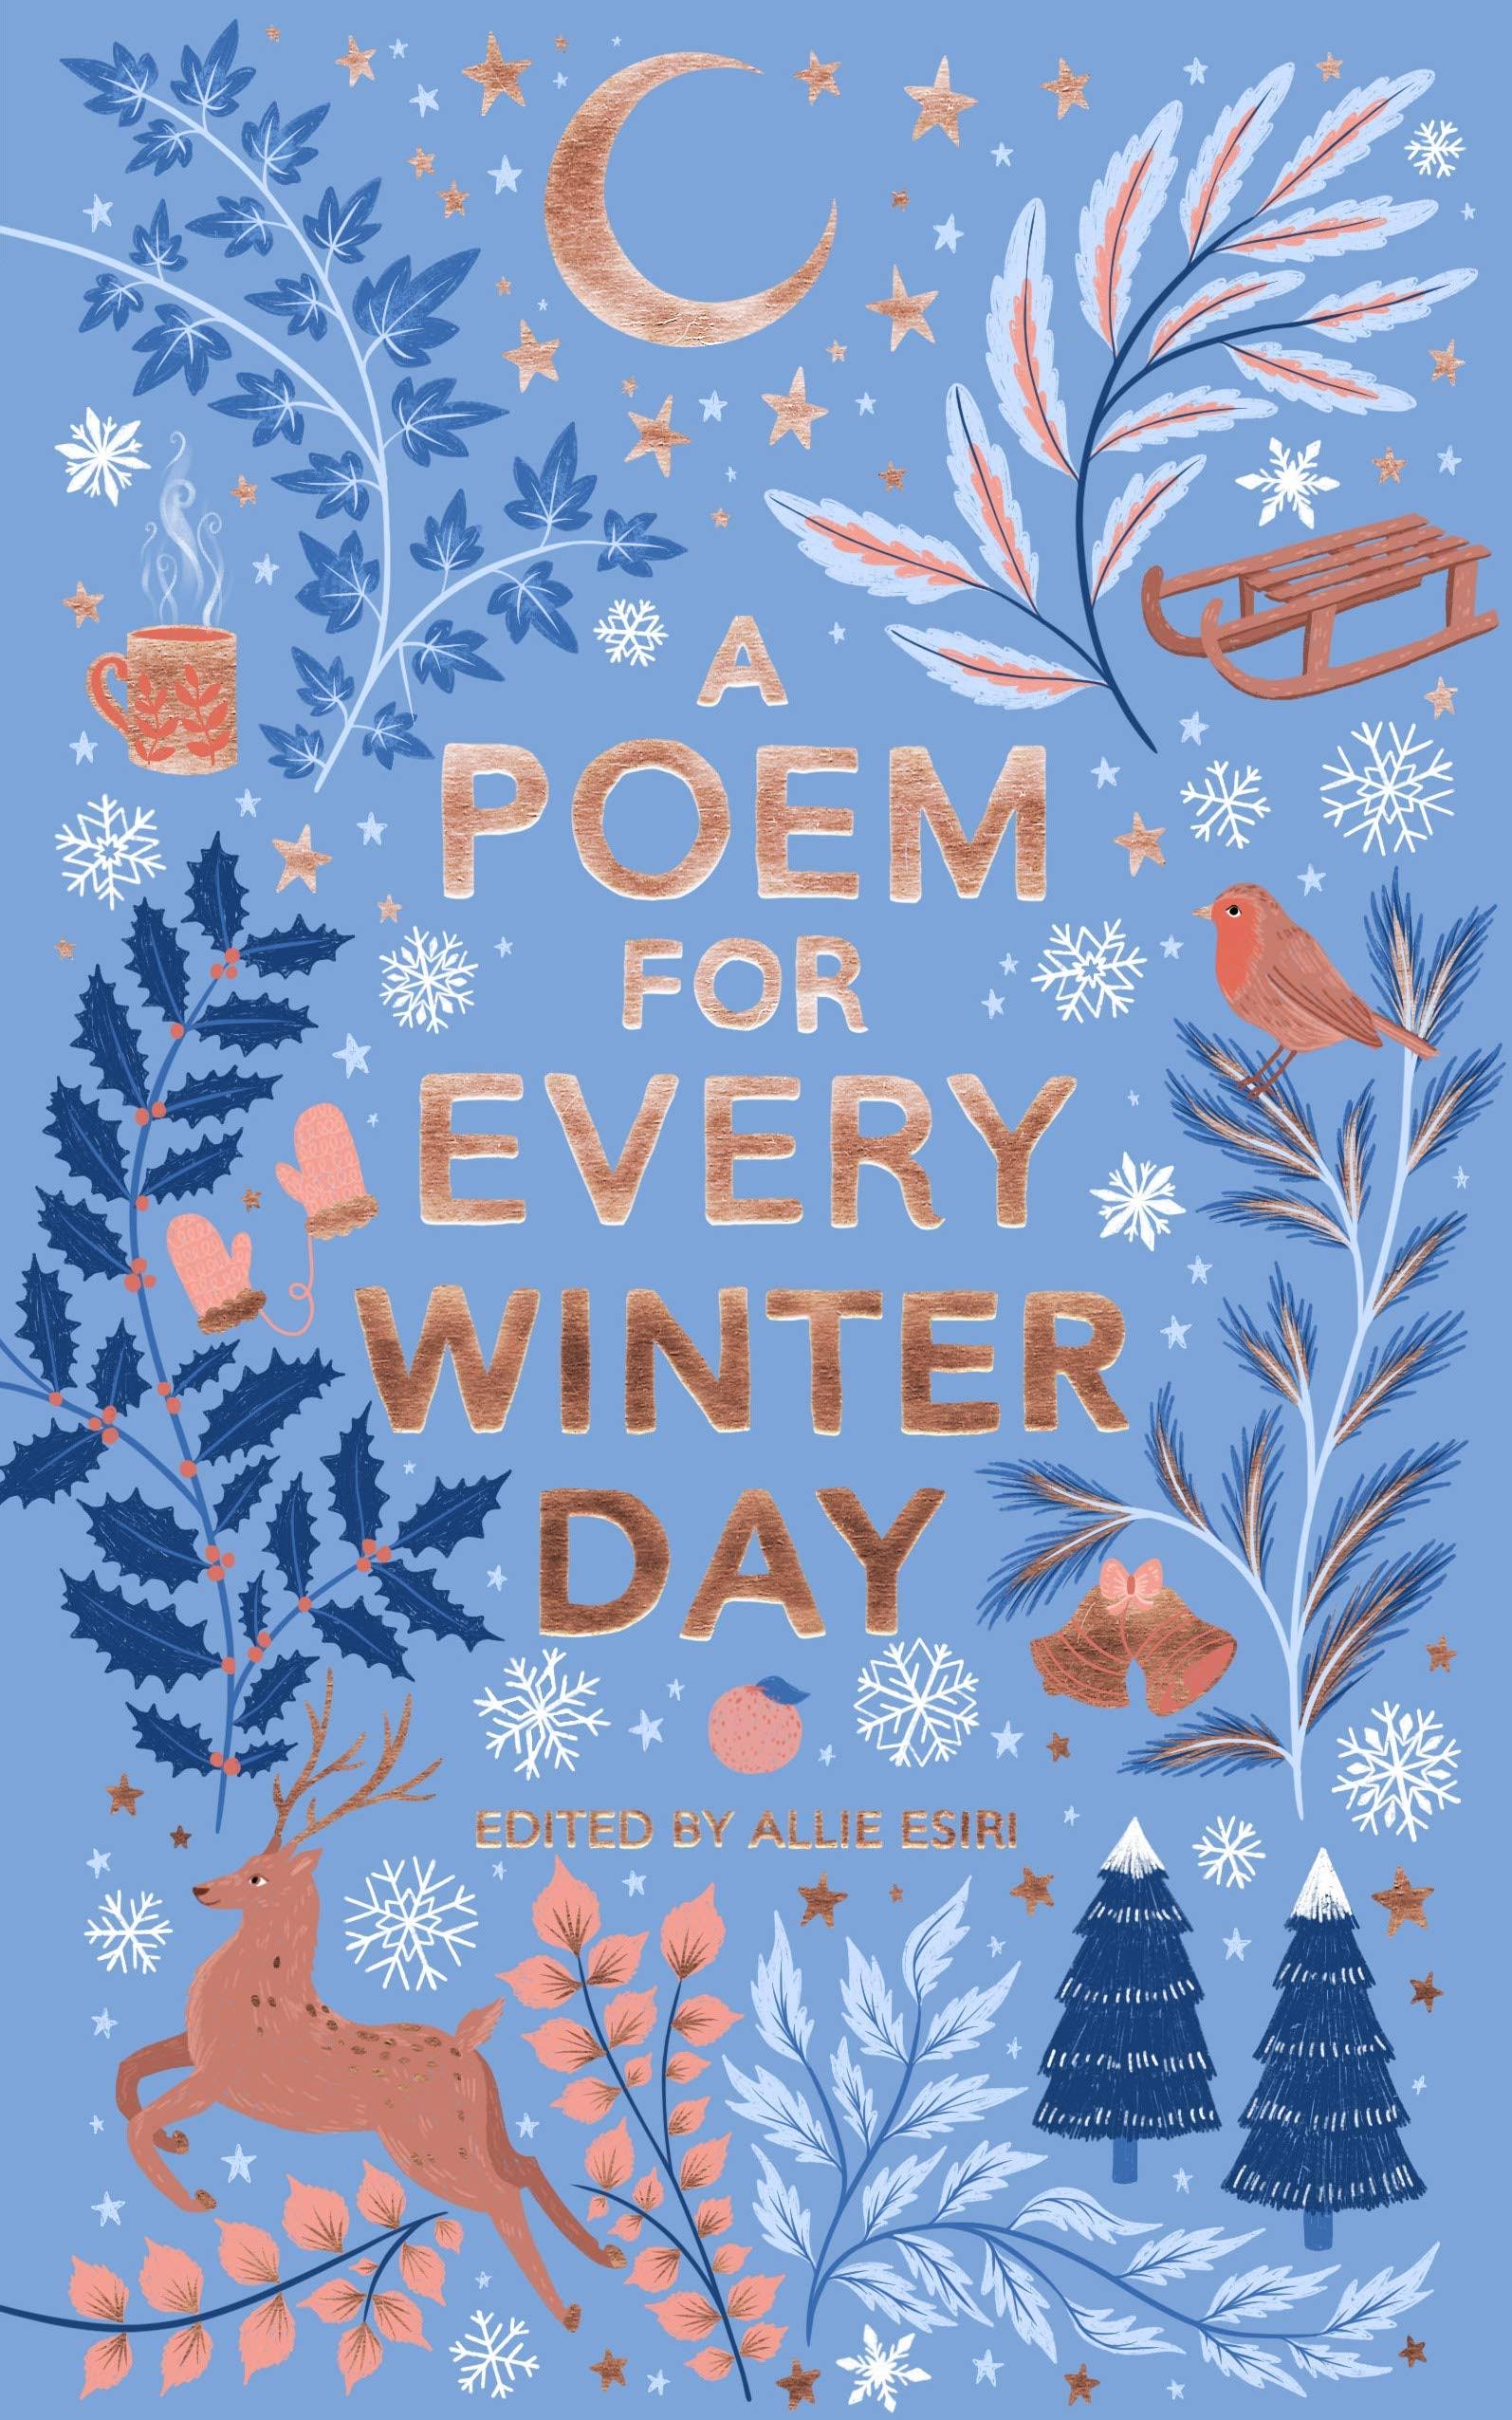 A Poem for Every Winter Day [Book]